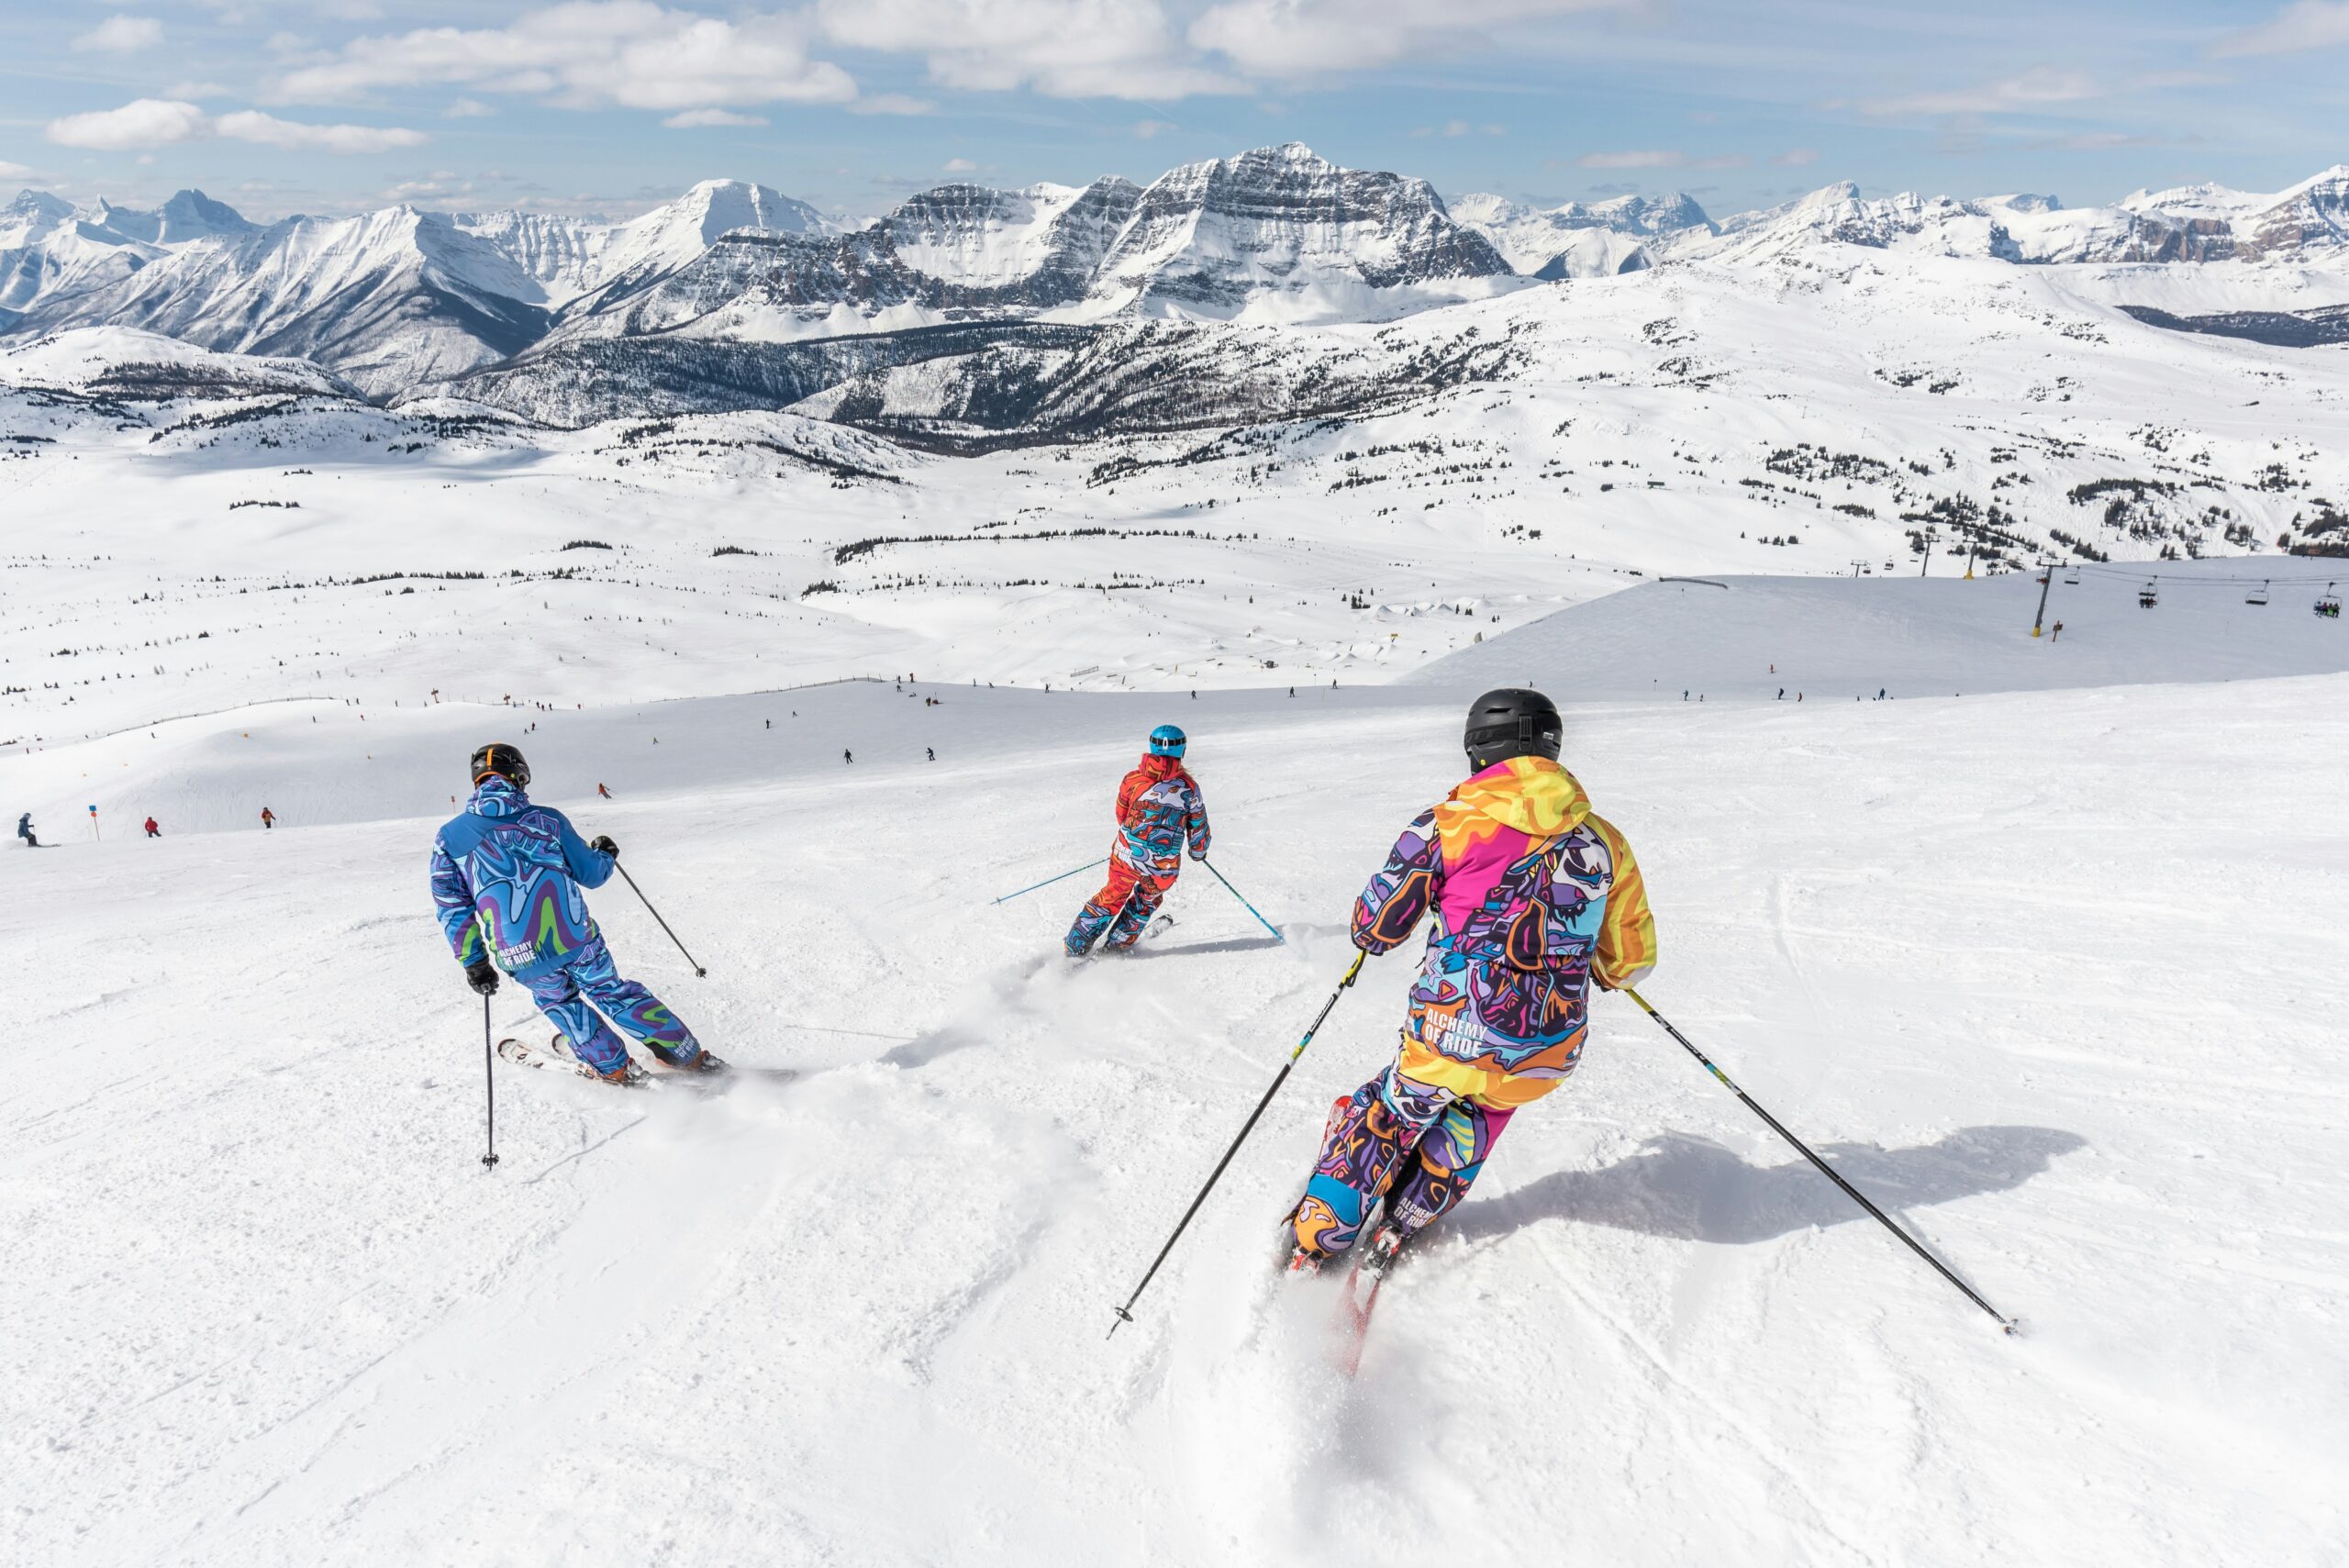 Best skiing in Canada. Skiers skiing on the mountain. Photo by Banff Sunshine Village on Unsplash